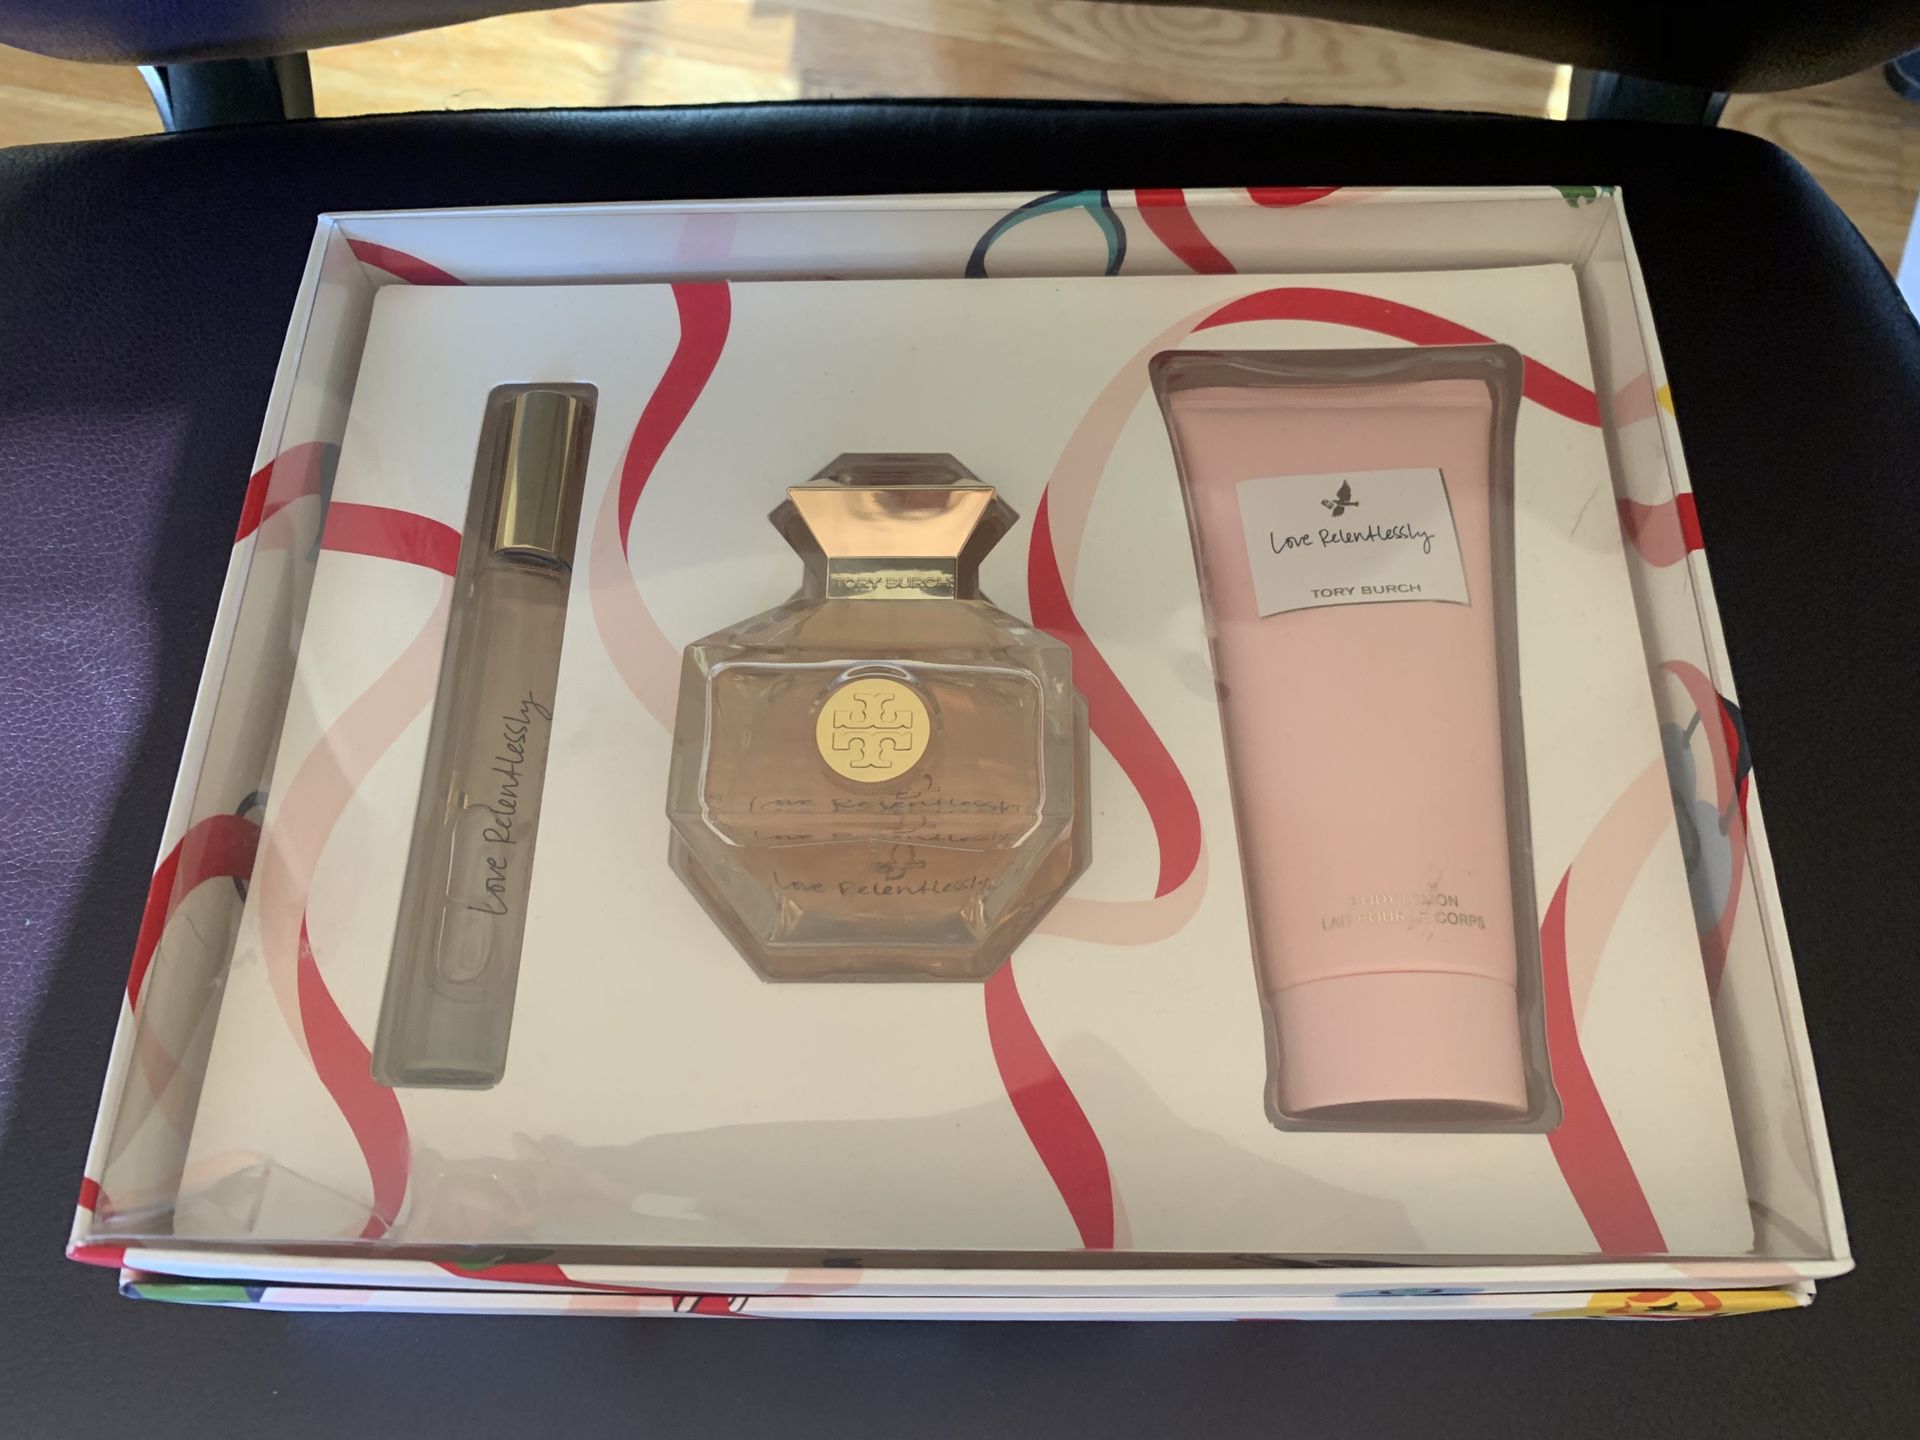 Tory Burch Perfume - Love relentlessly Gift Set for Sale in Washington, DC  - OfferUp